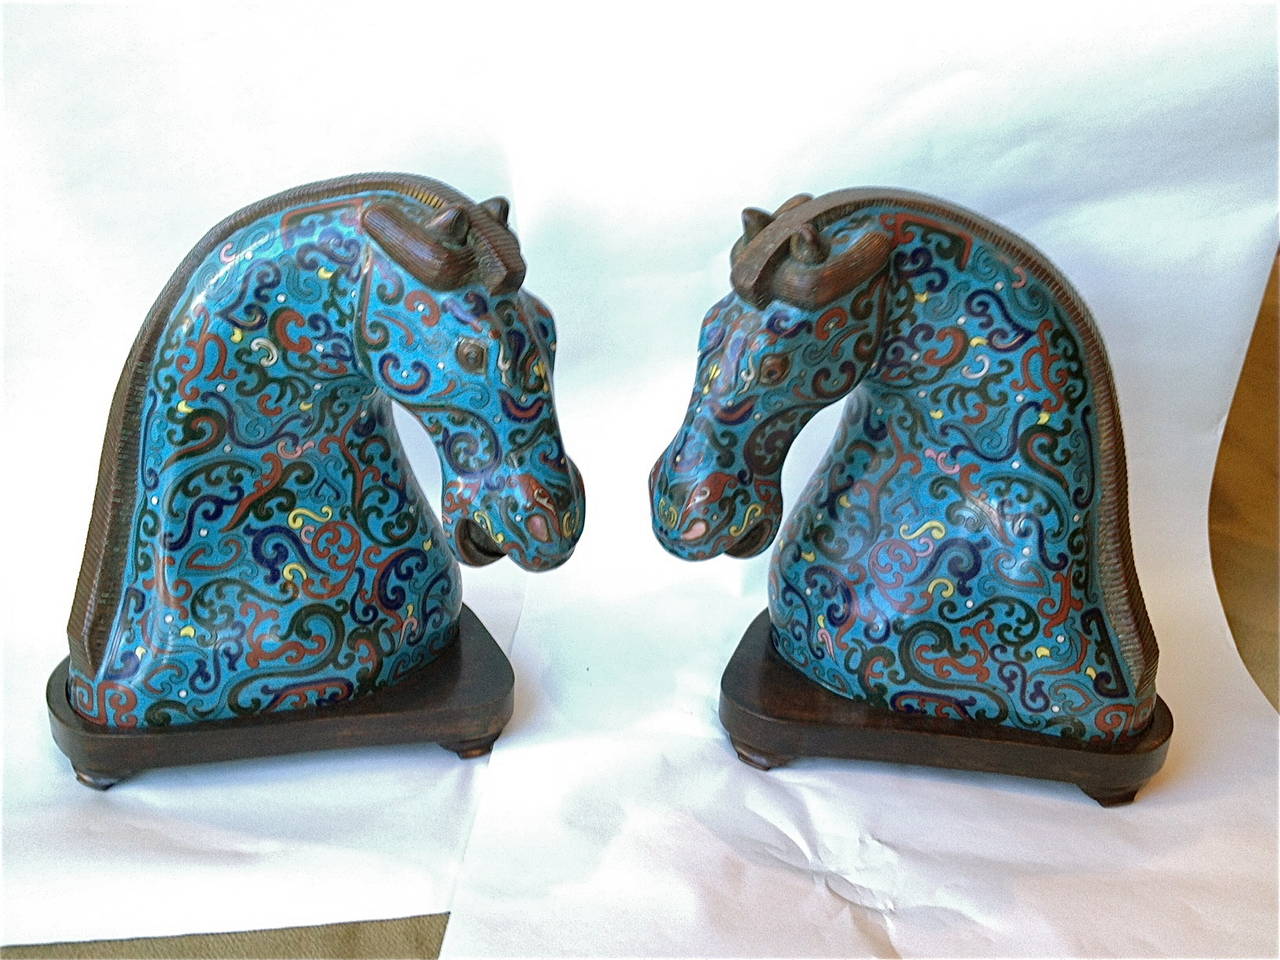 This pair is so decorative and will make a statement and add some animation. The colors and pattern are strong. Raised on their original hand-carved stands
and in excellent condition.